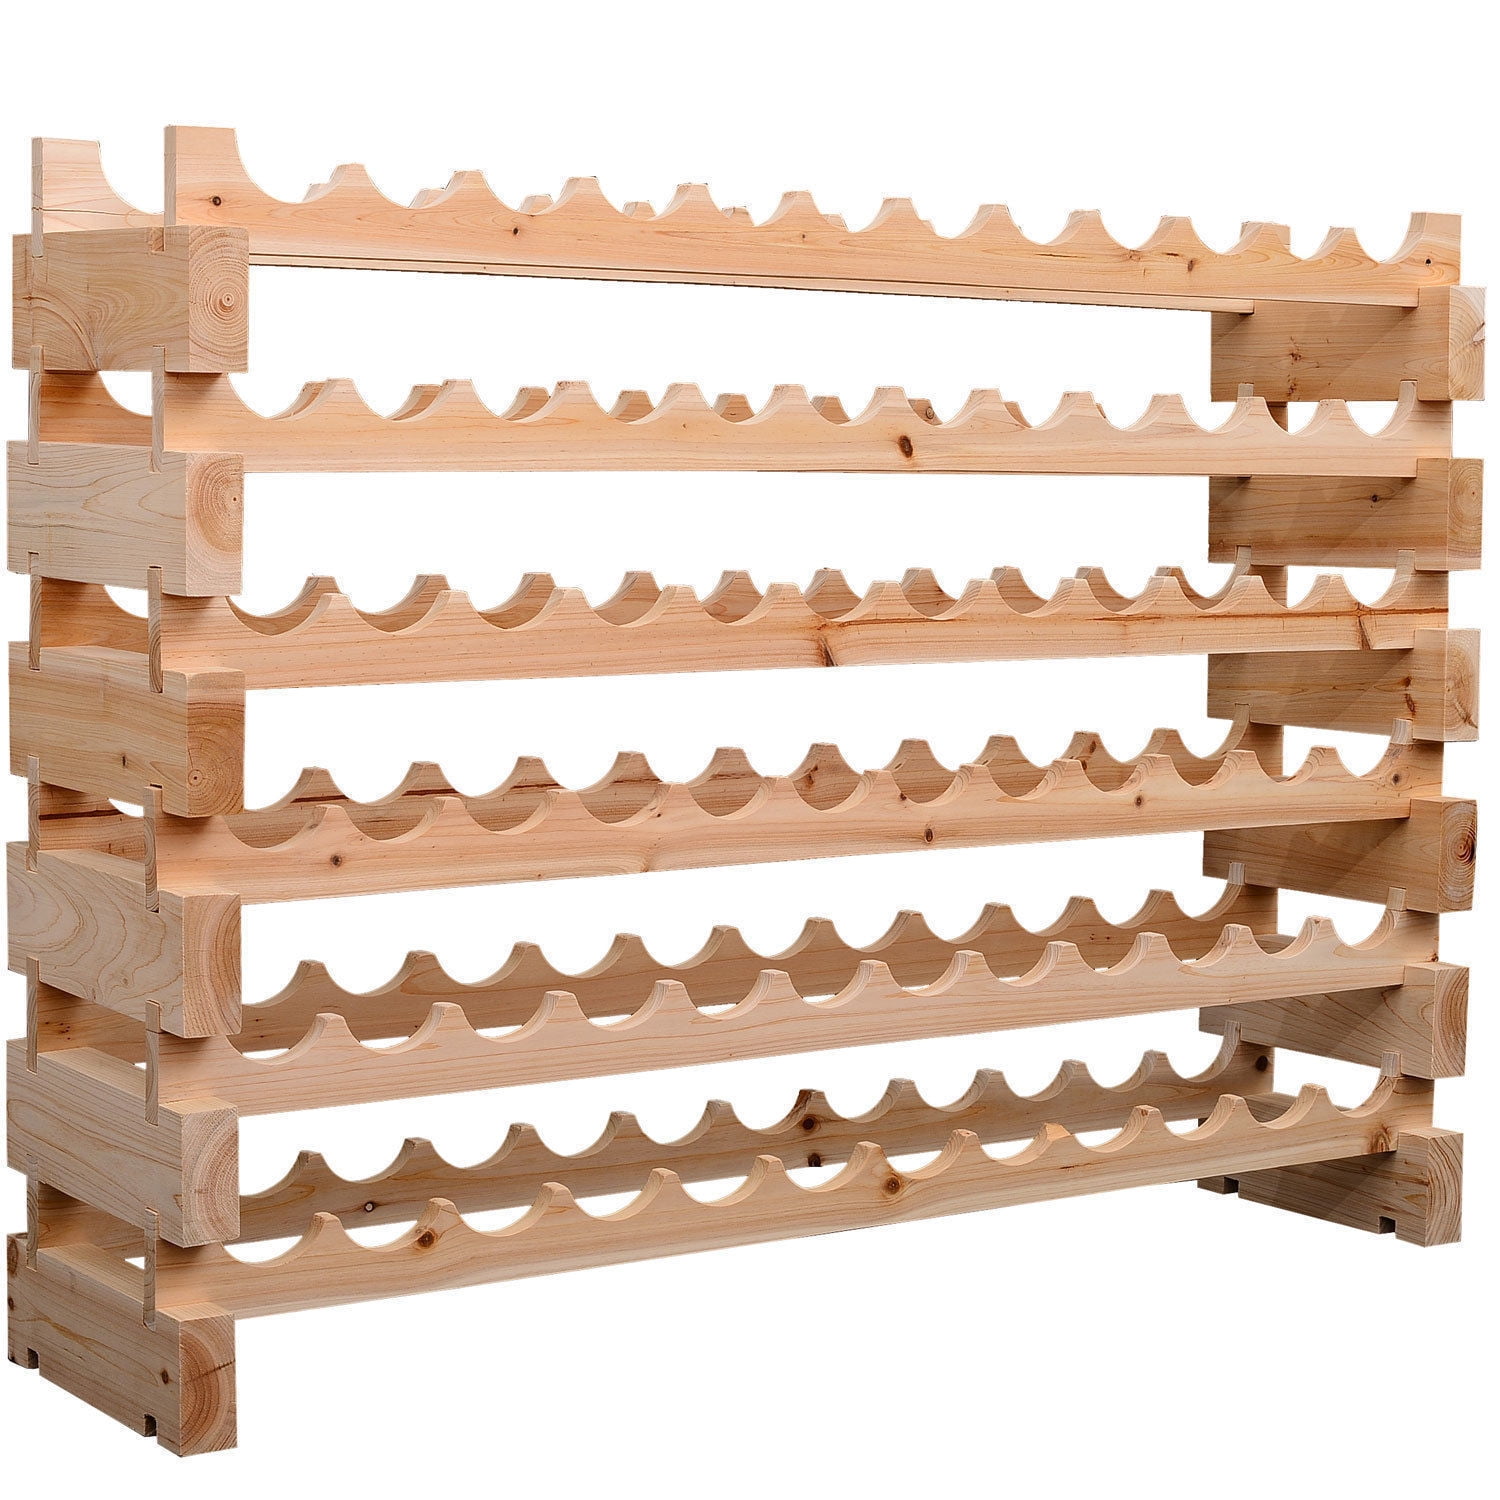 HOMECHO 20 Bamboo Wine Display Bottles Storage Rack Free Standing with 5-Tier Shelf Wobble-Free Natural Color HMC-BA-002 